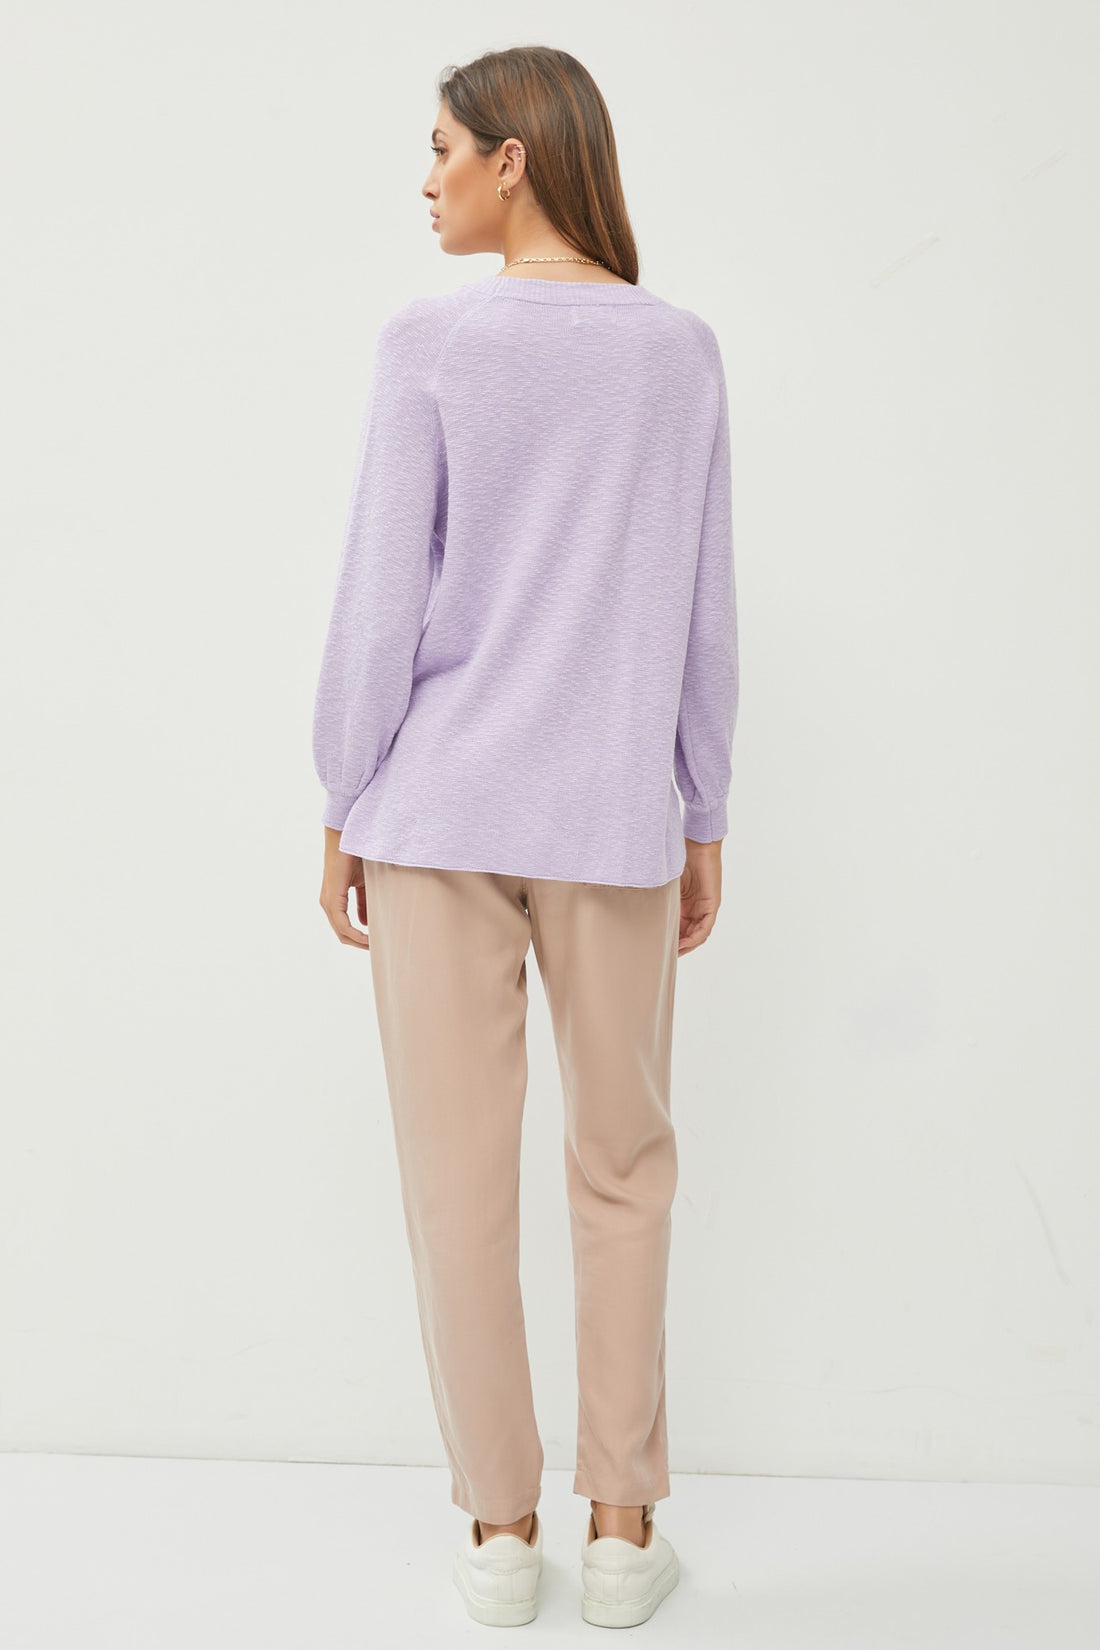 The Bailey Lavender Sweater